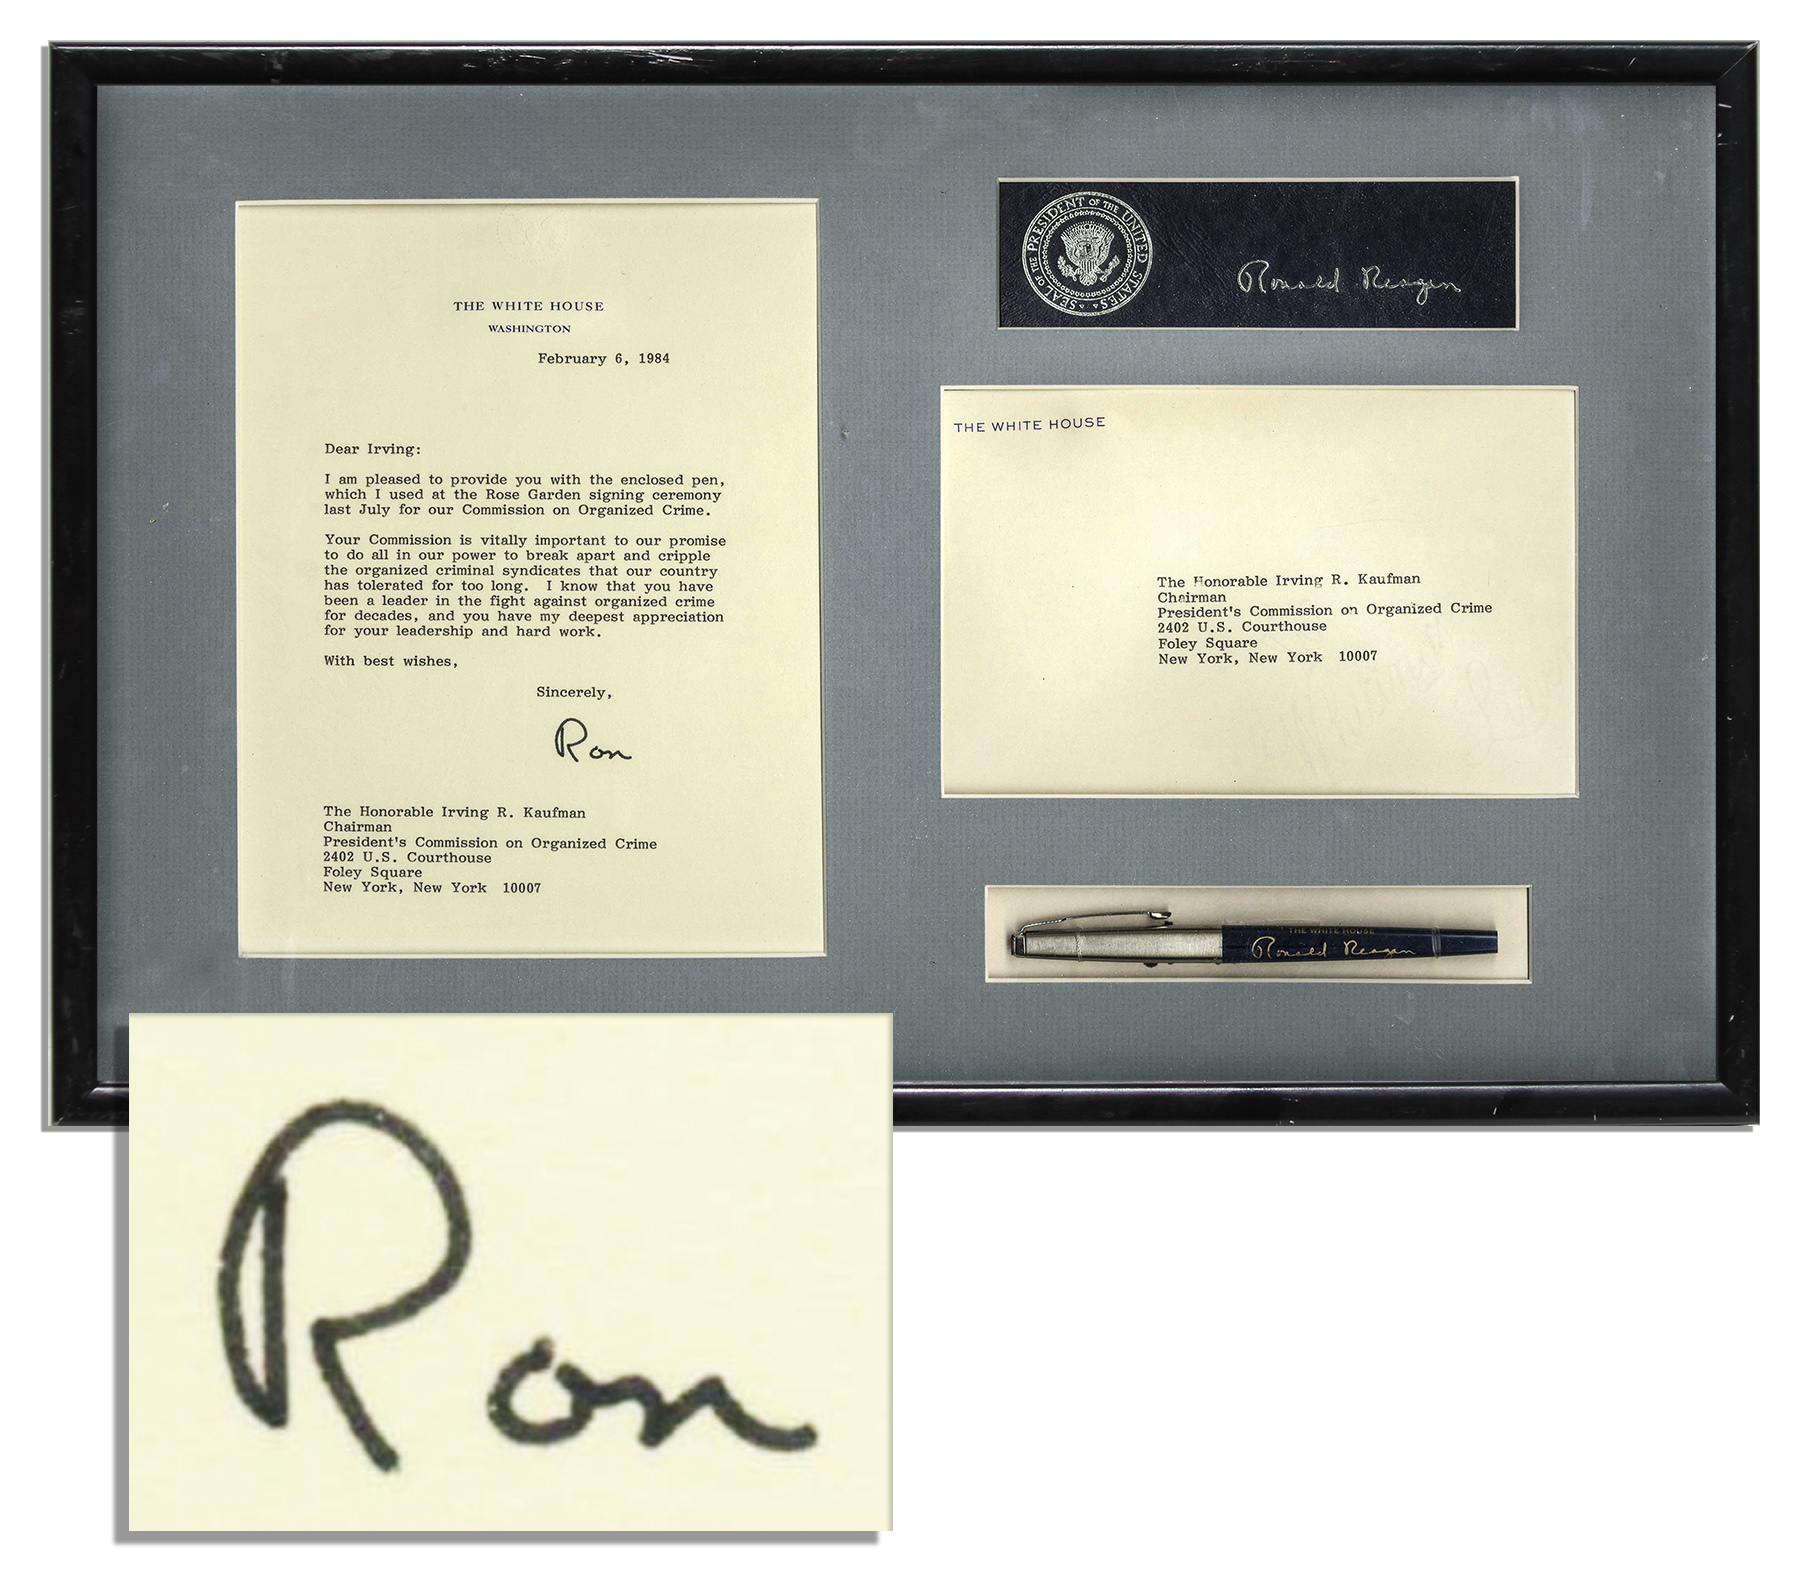 White House Pen Ronald Reagan Personally Owned & Used Pen -- Used to Sign the President's Commission on Organized Crime Important Executive Order